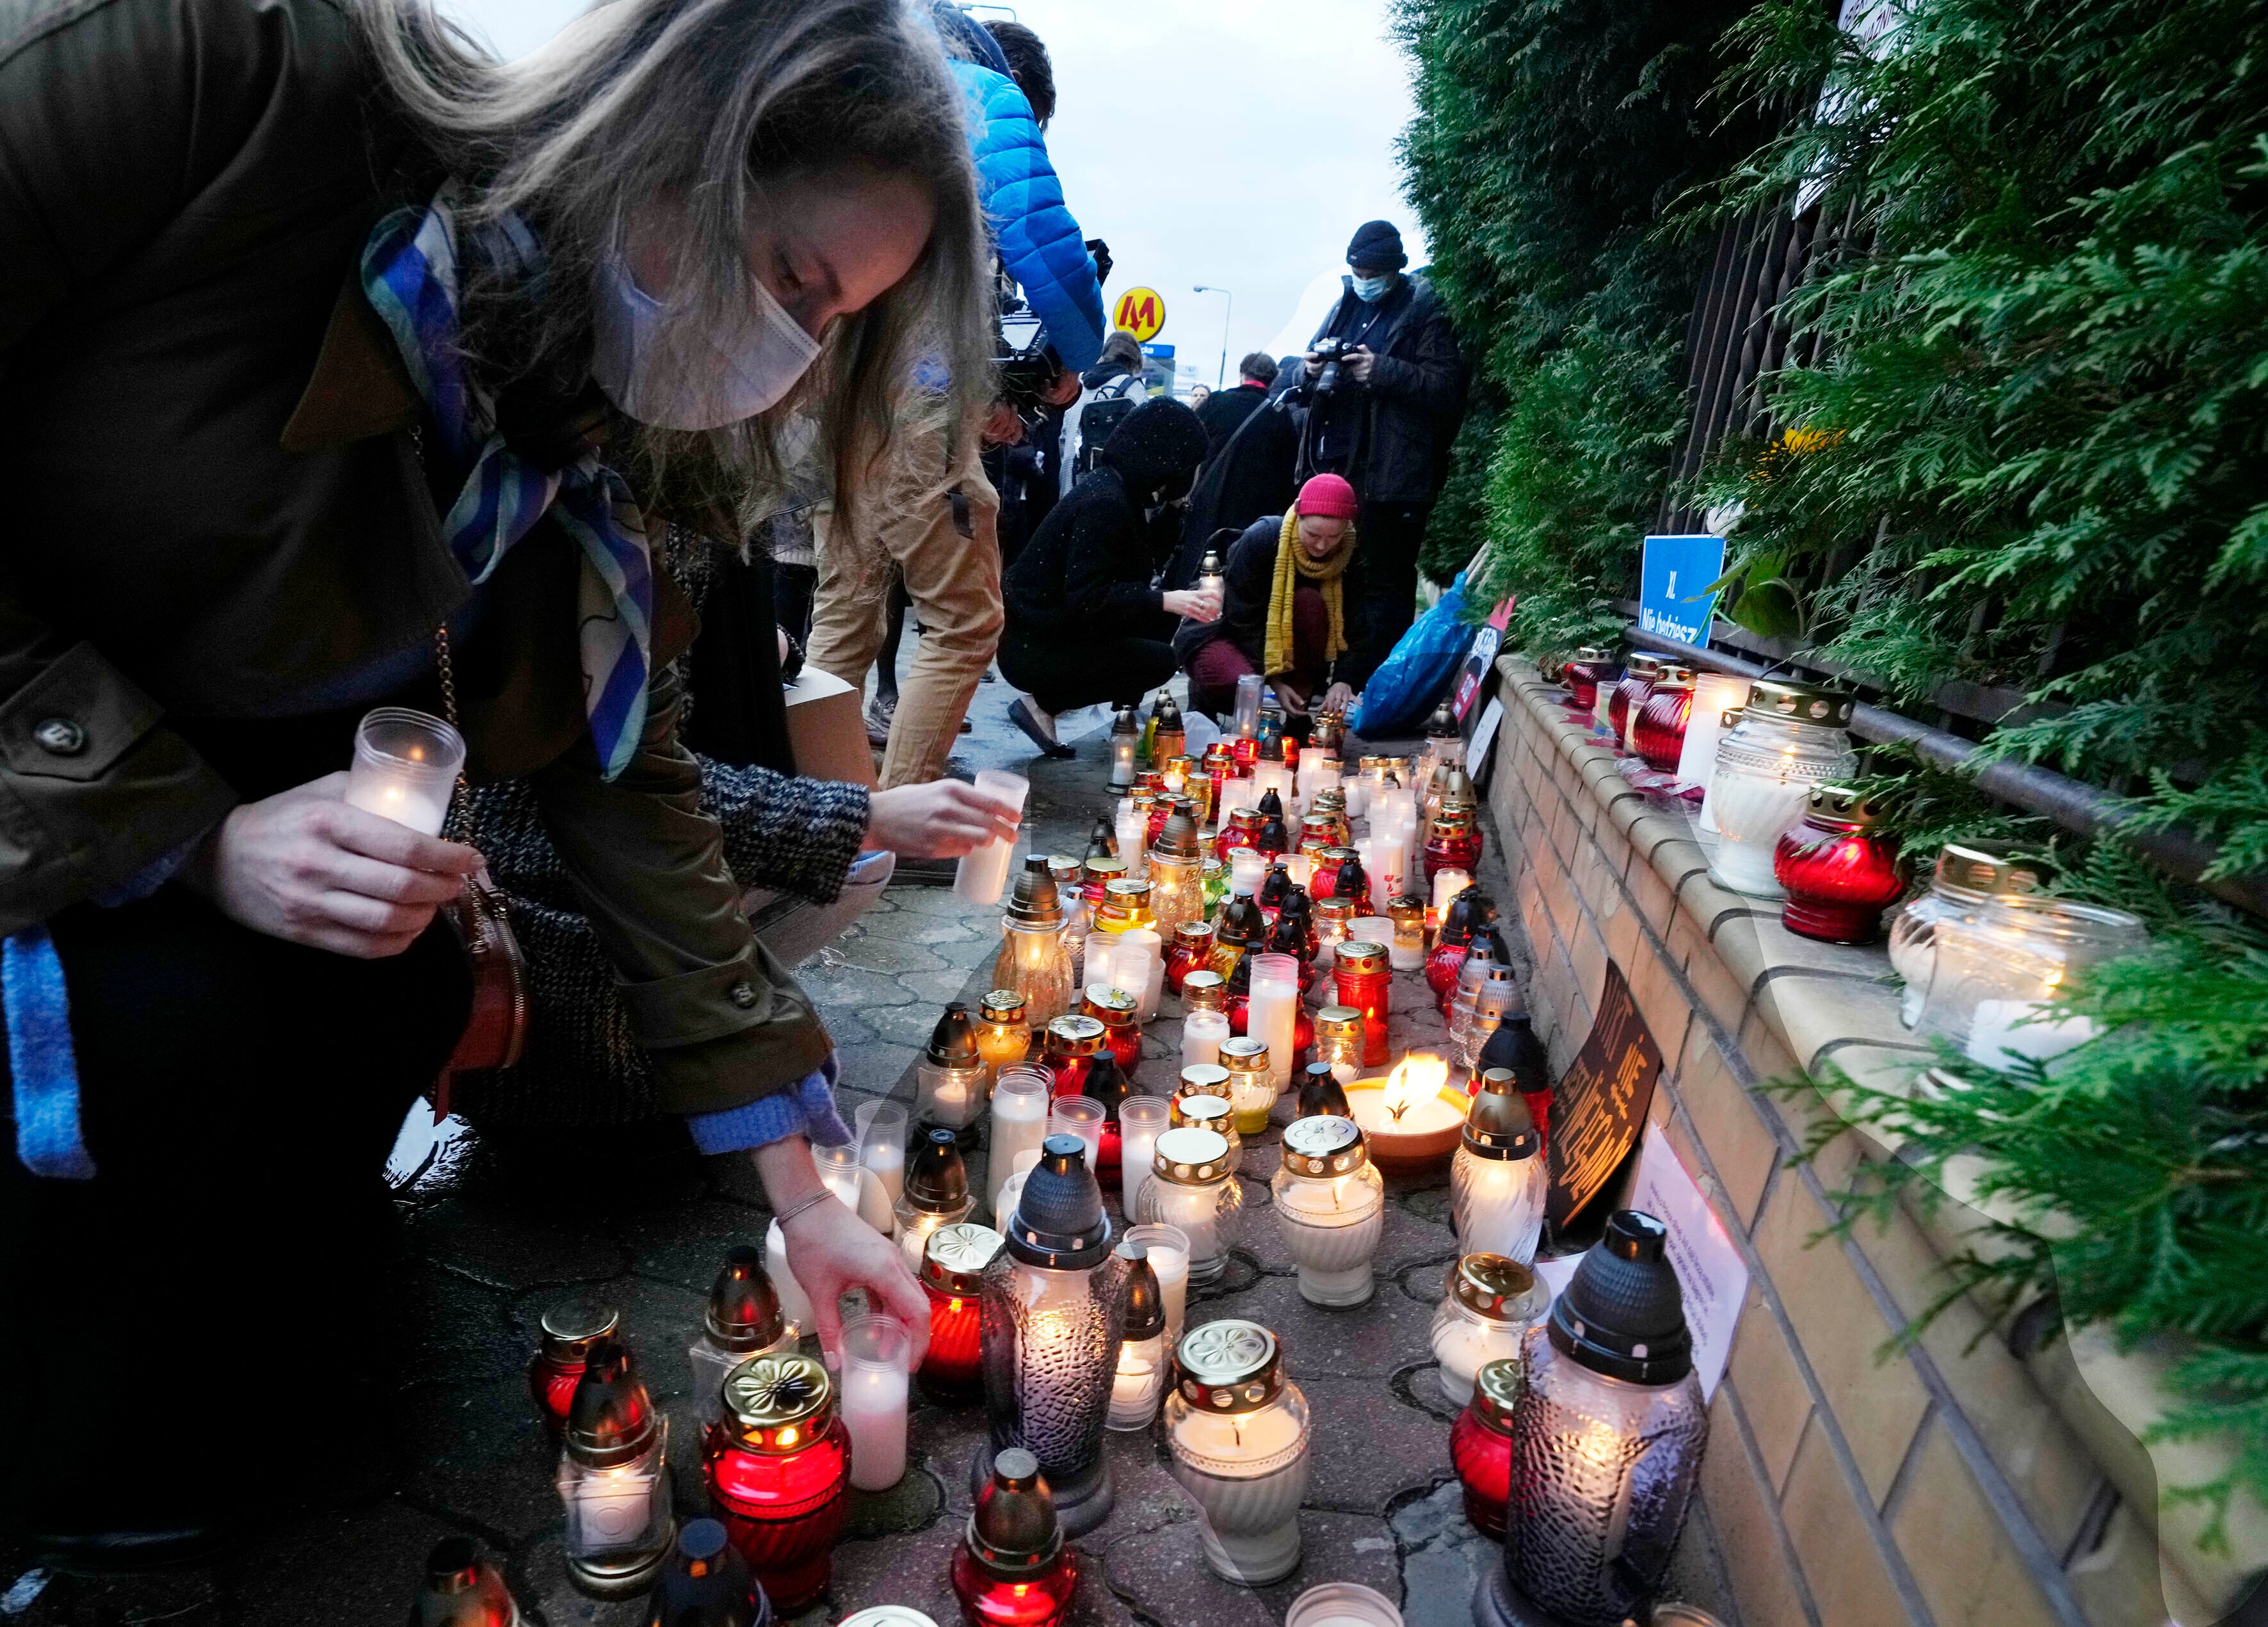 Warsaw residents place candles before the national Border Guards Headquarters in a sign of mourning for four migrants found dead over the weekend